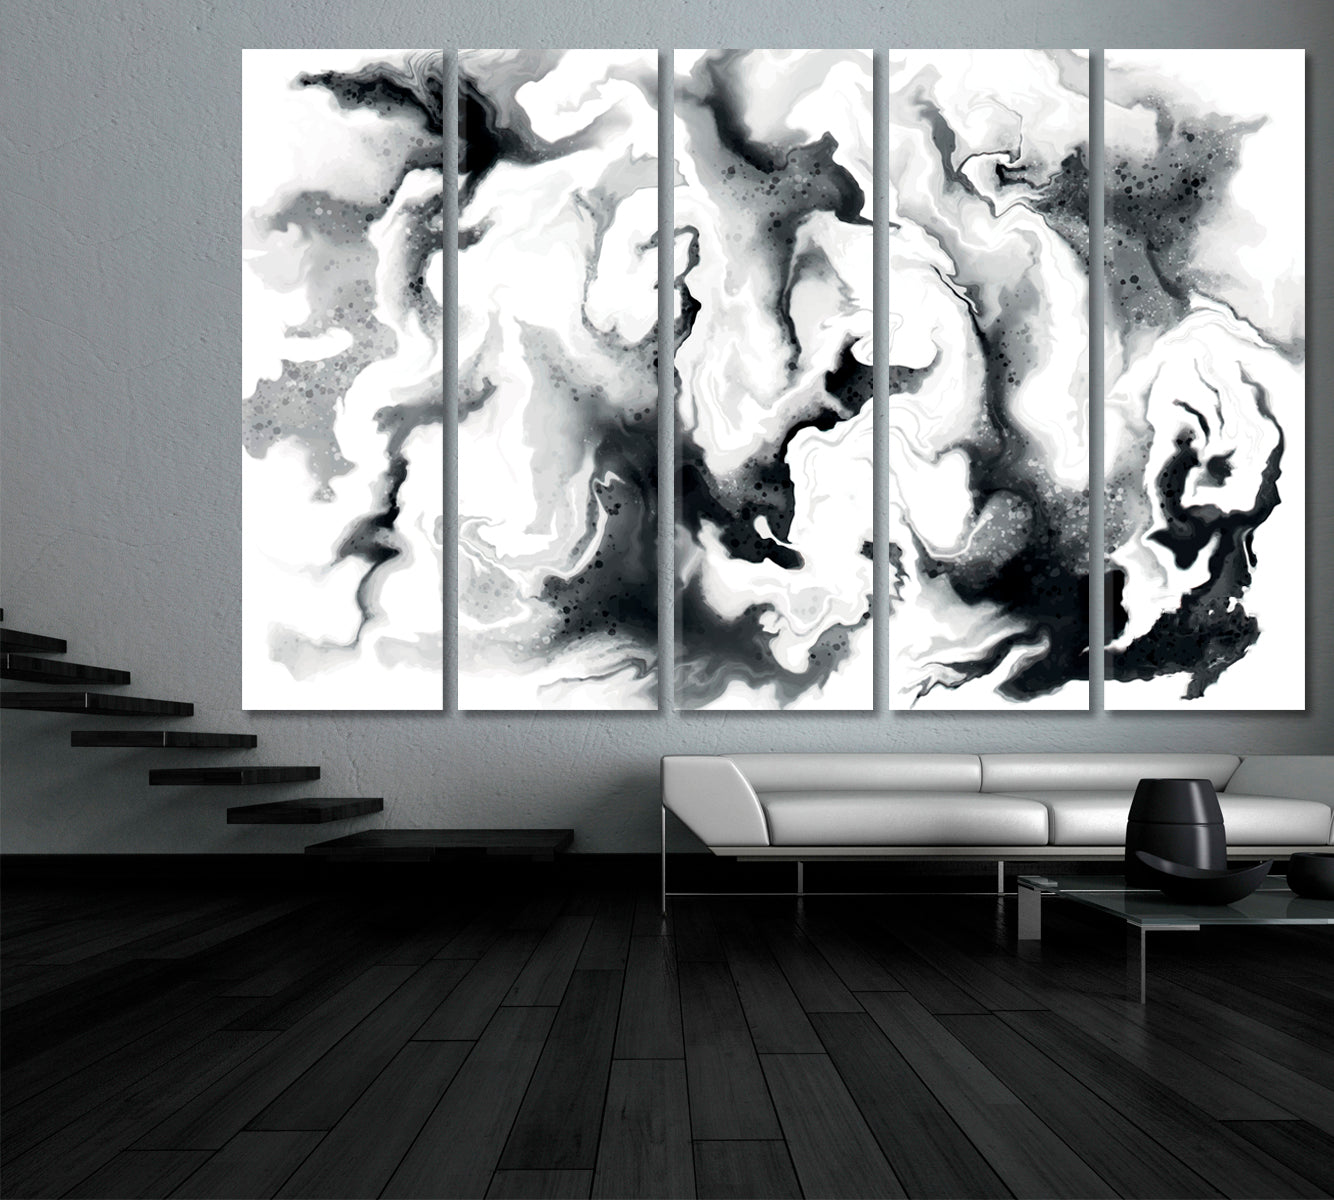 Black and White Fluid Marbling Black and White Wall Art Print Artesty 5 panels 36" x 24" 